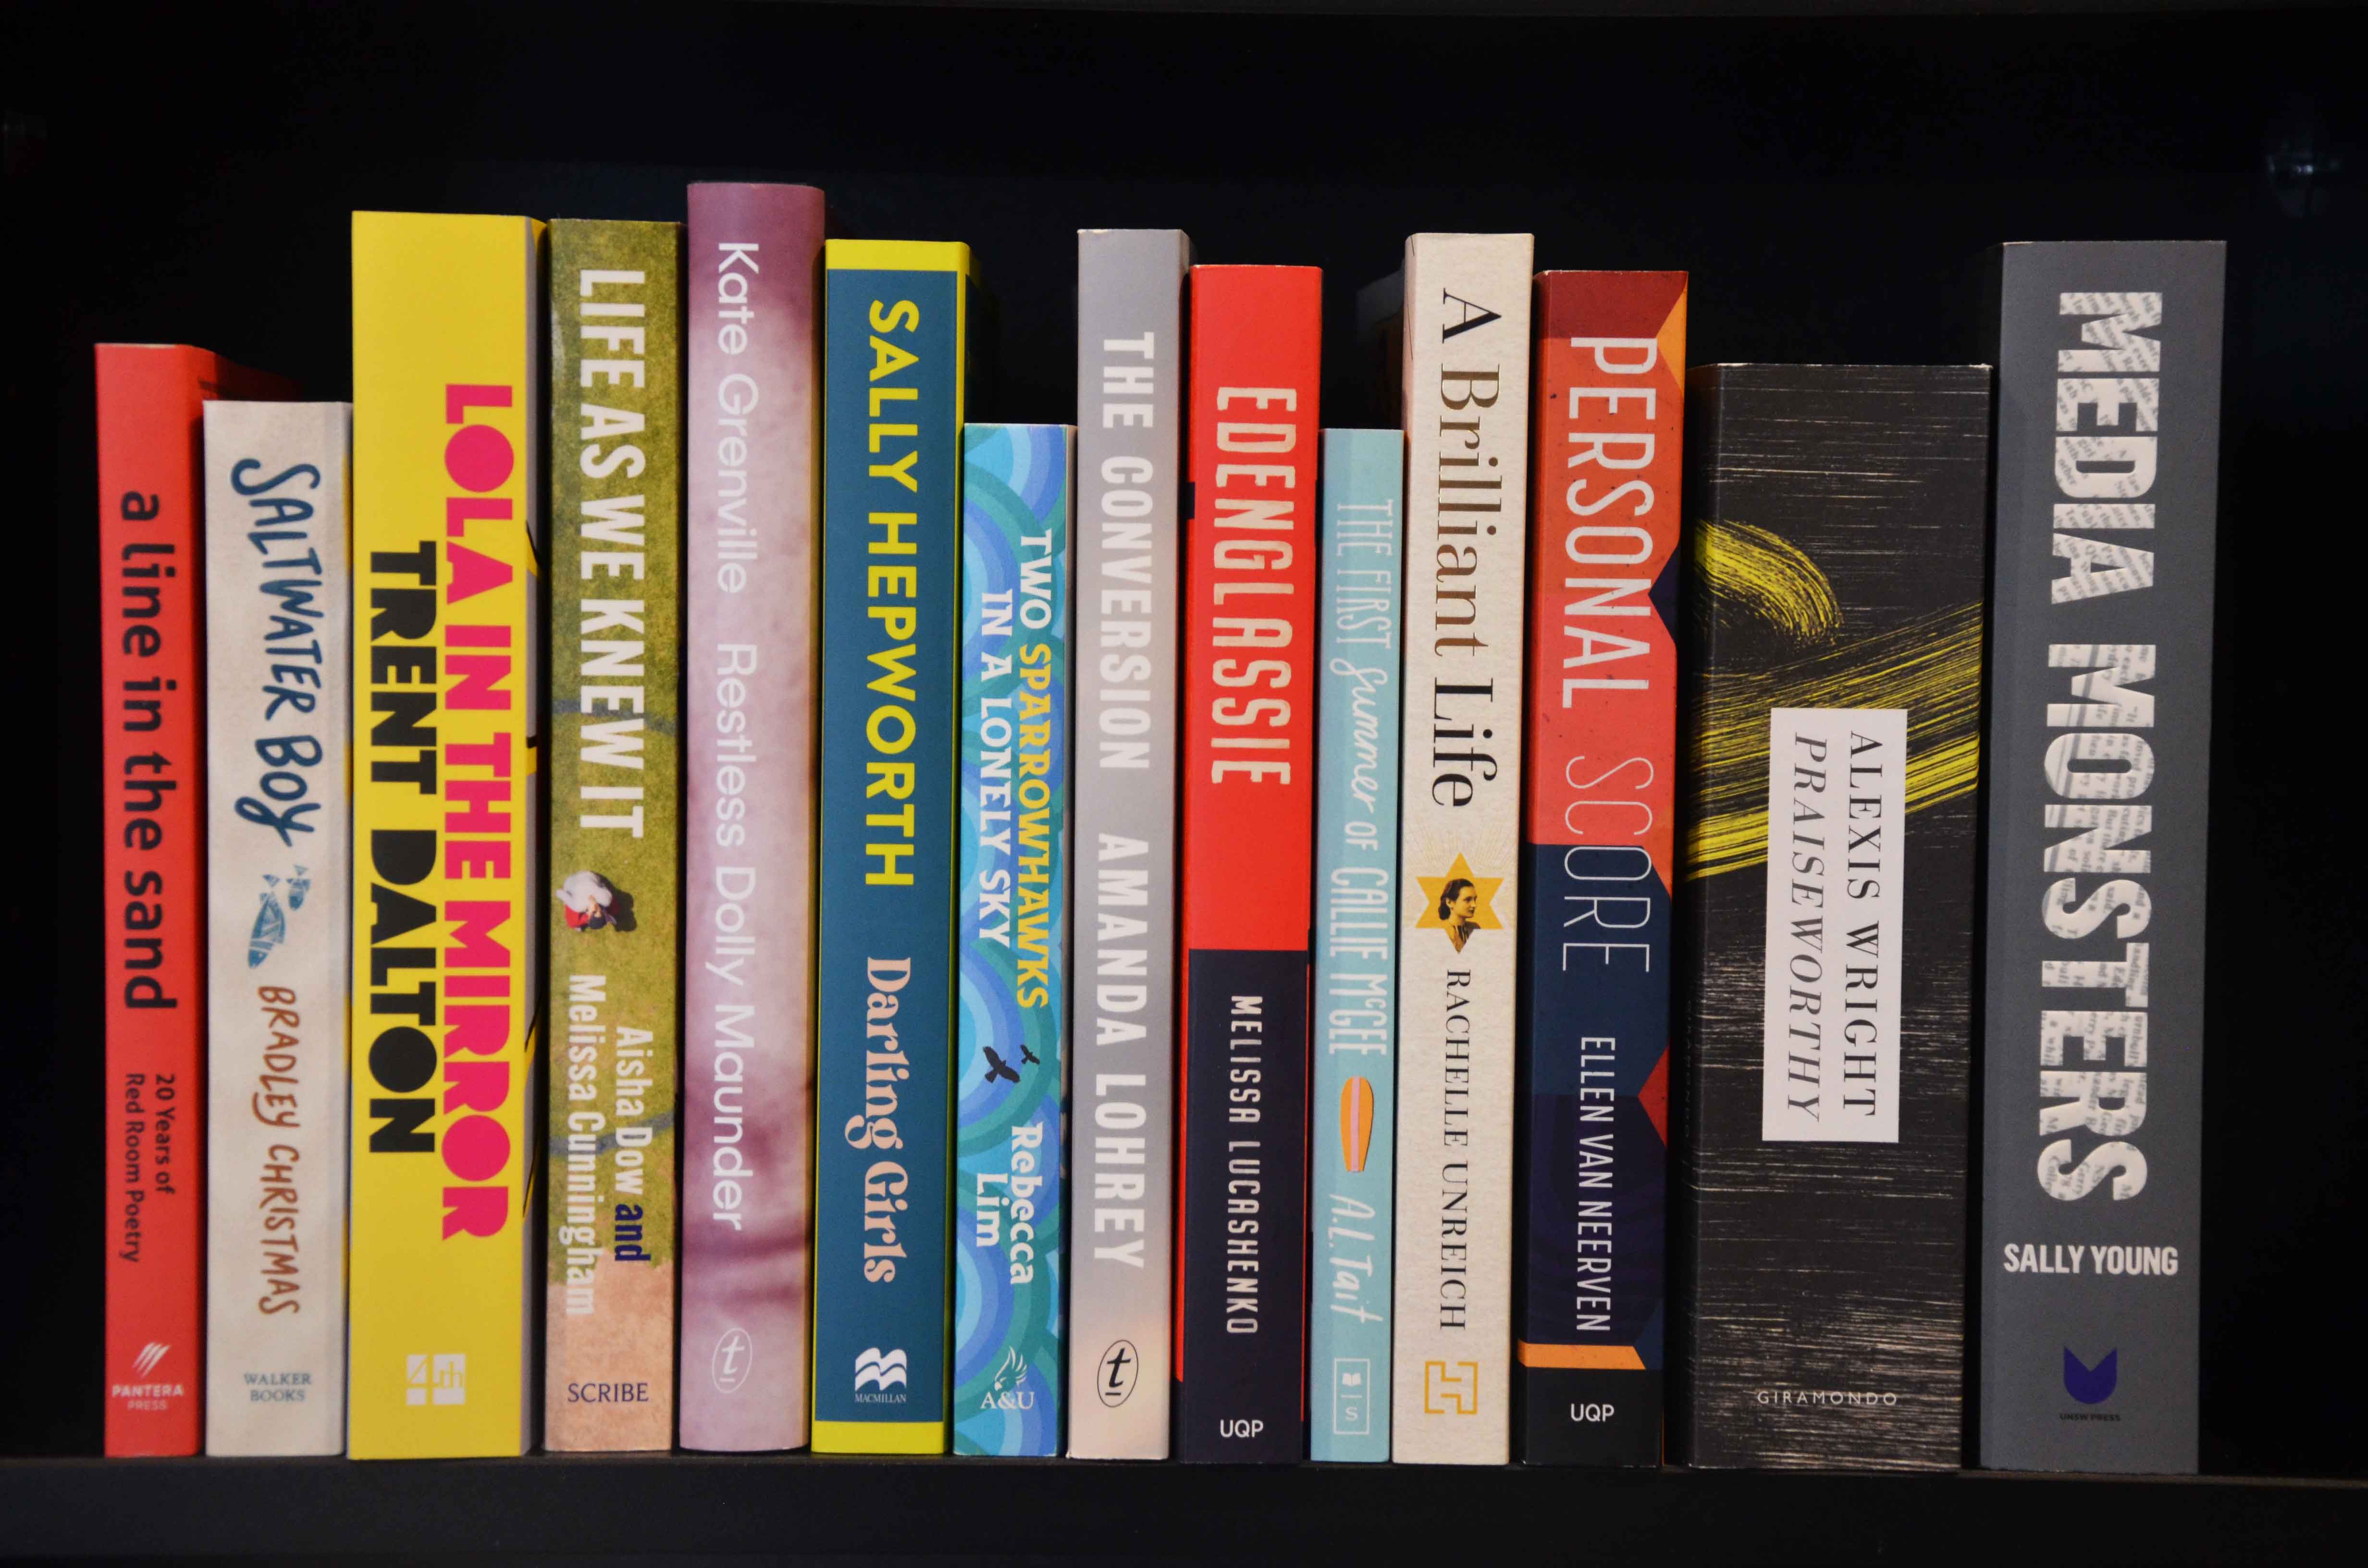 Image of spines from each of the long listed books